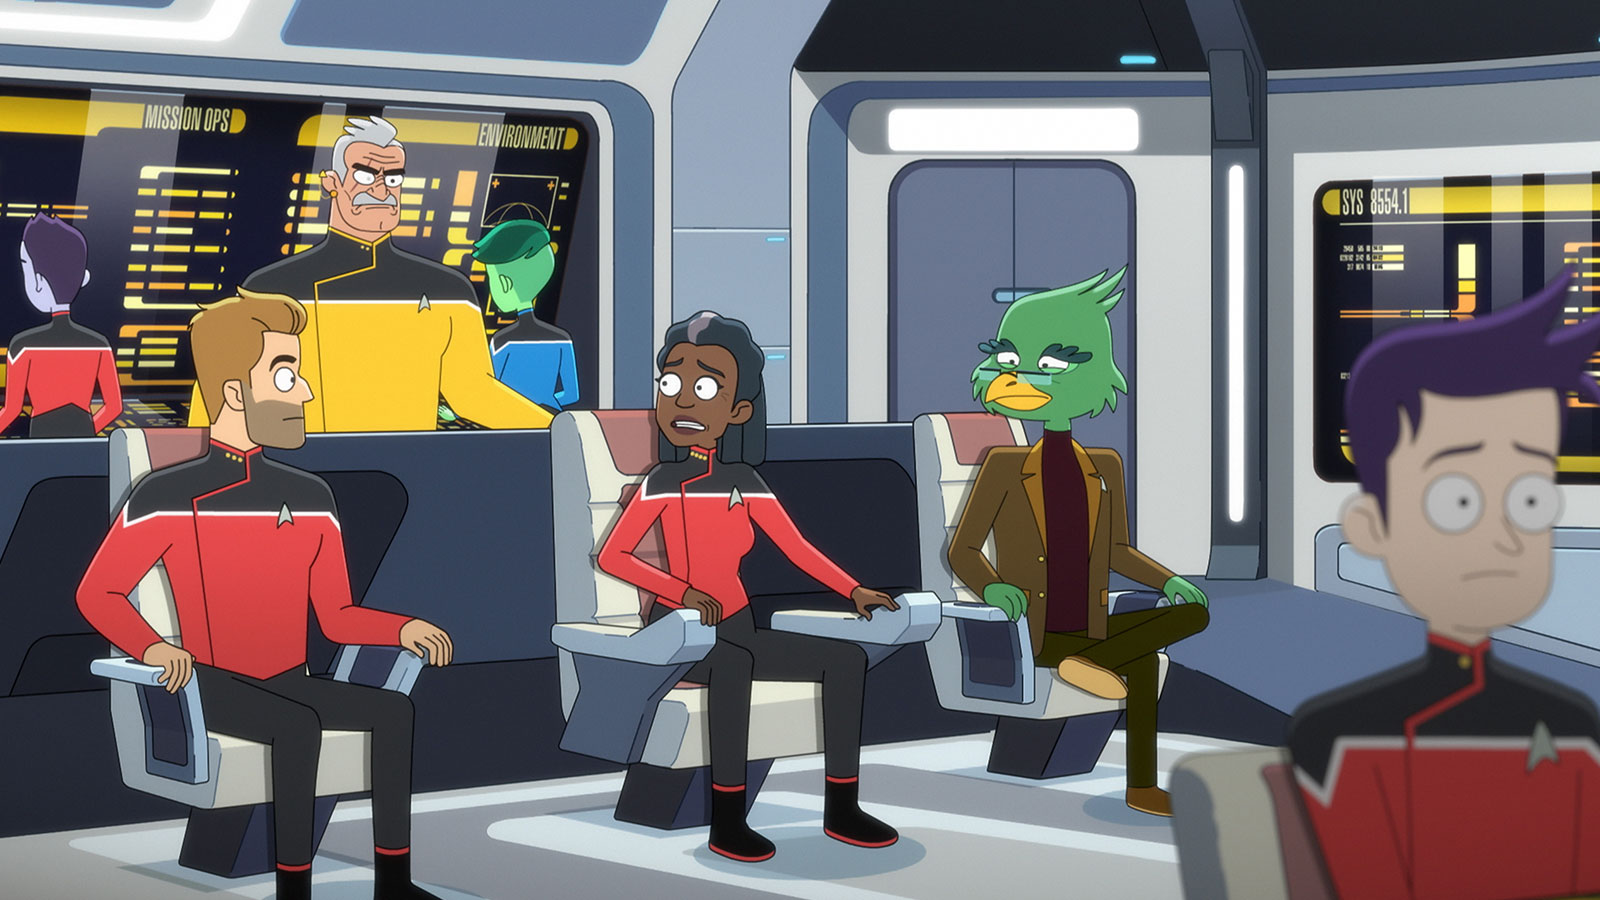 Star Trek: Lower Decks Season 3 Finale “The Stars at Night” New Images + Preview